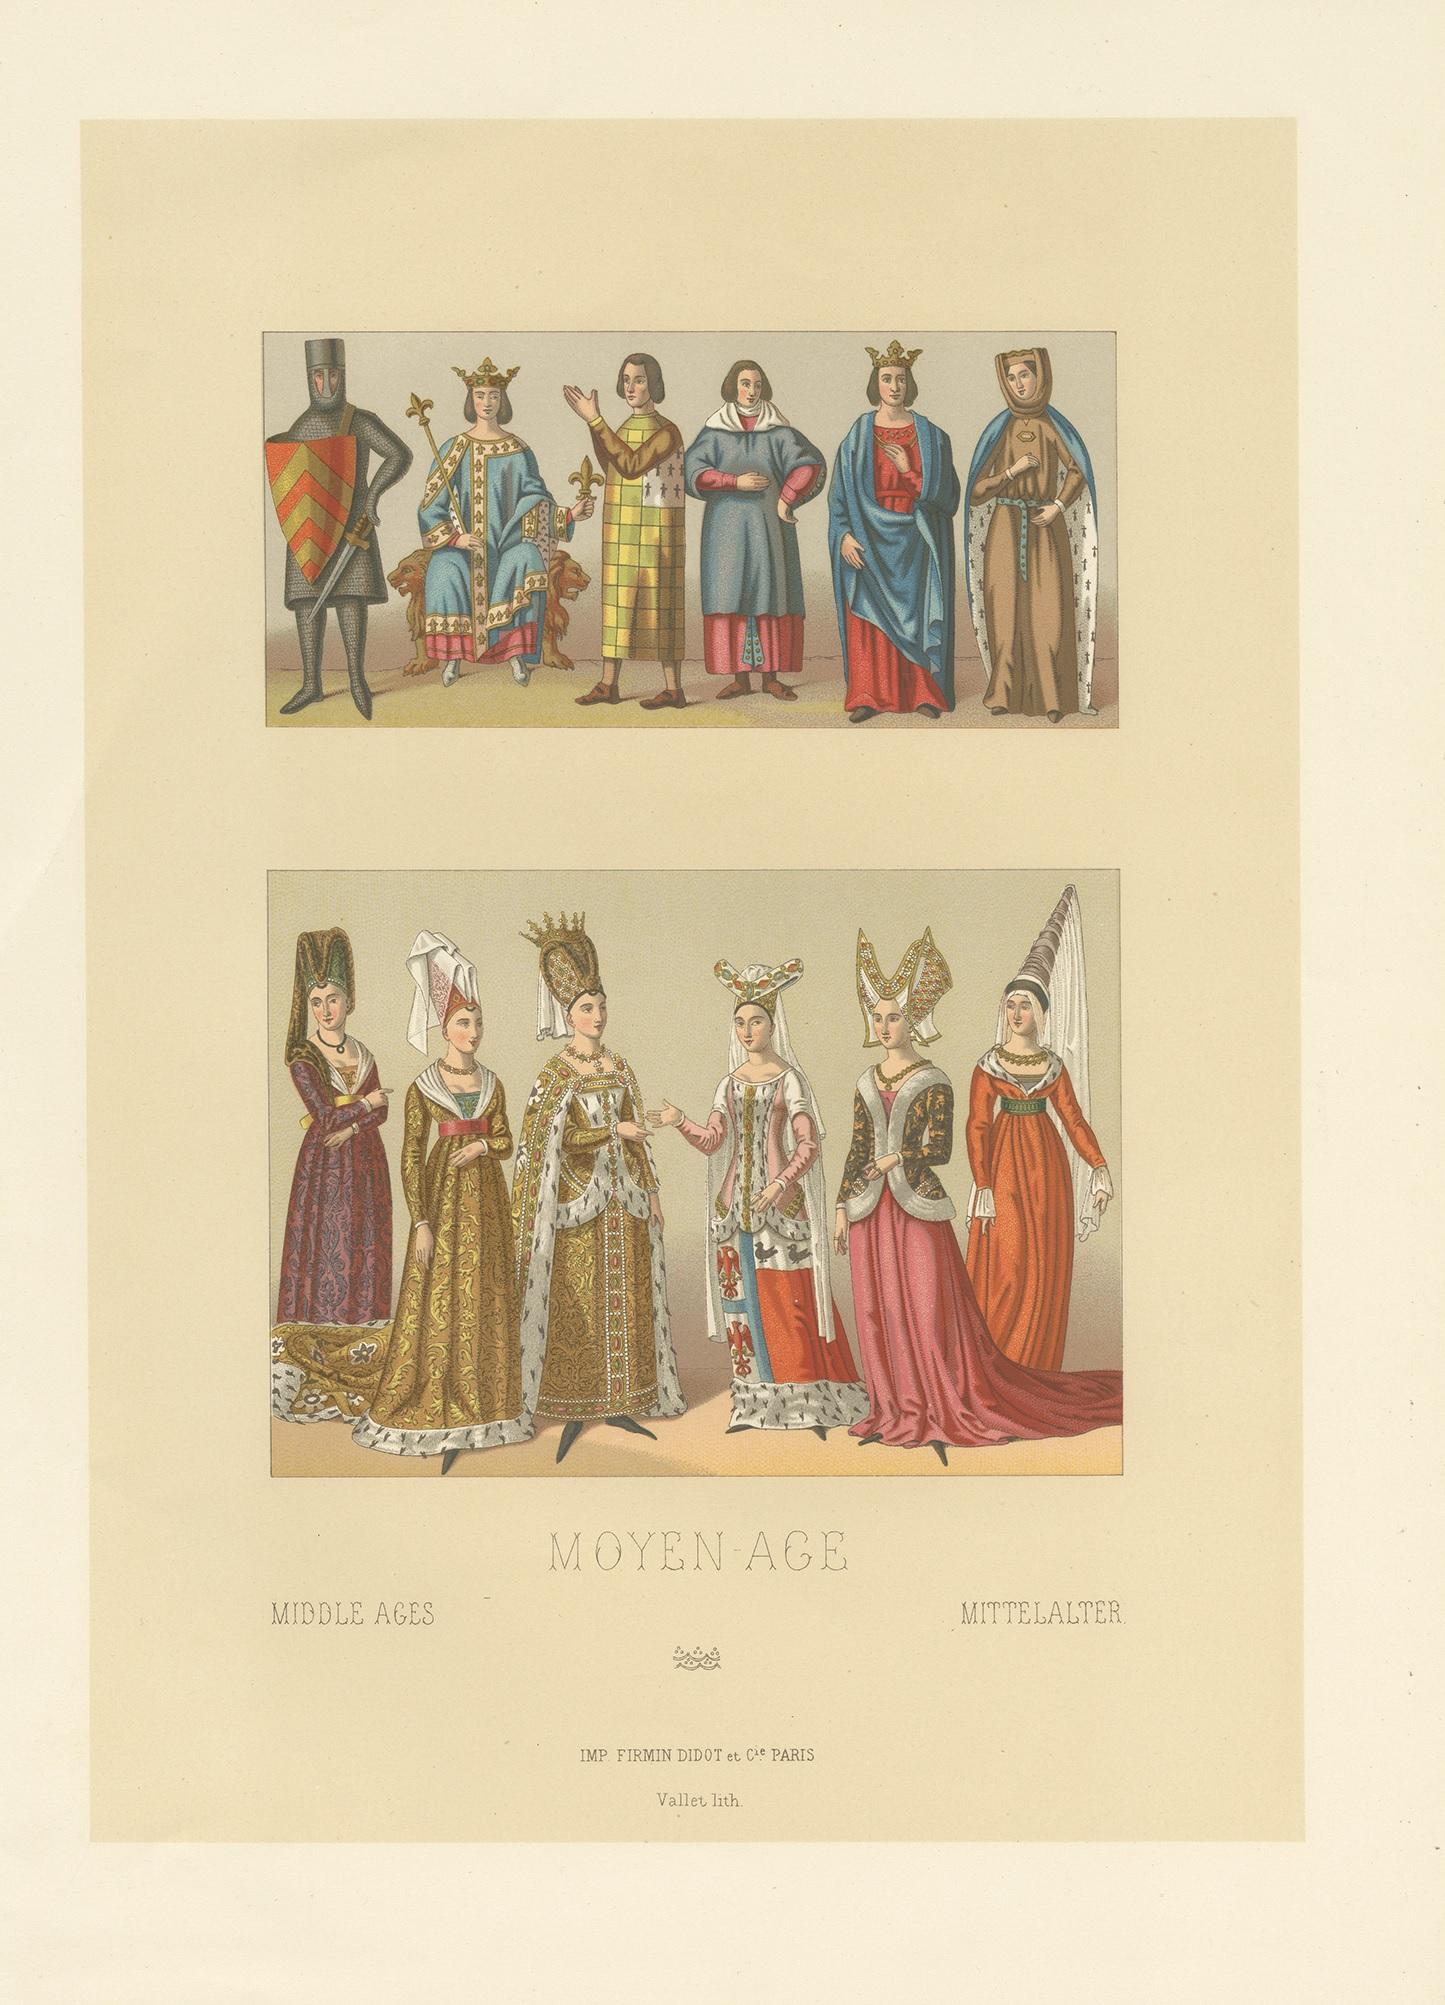 Antique print titled 'Moyen Age - Middle Ages- Mittelalter'. Chromolihograph of costumes of the Middle Ages. This print originates from 'Le Costume Historique' by A. Racinet. Lithographed by Vallet.